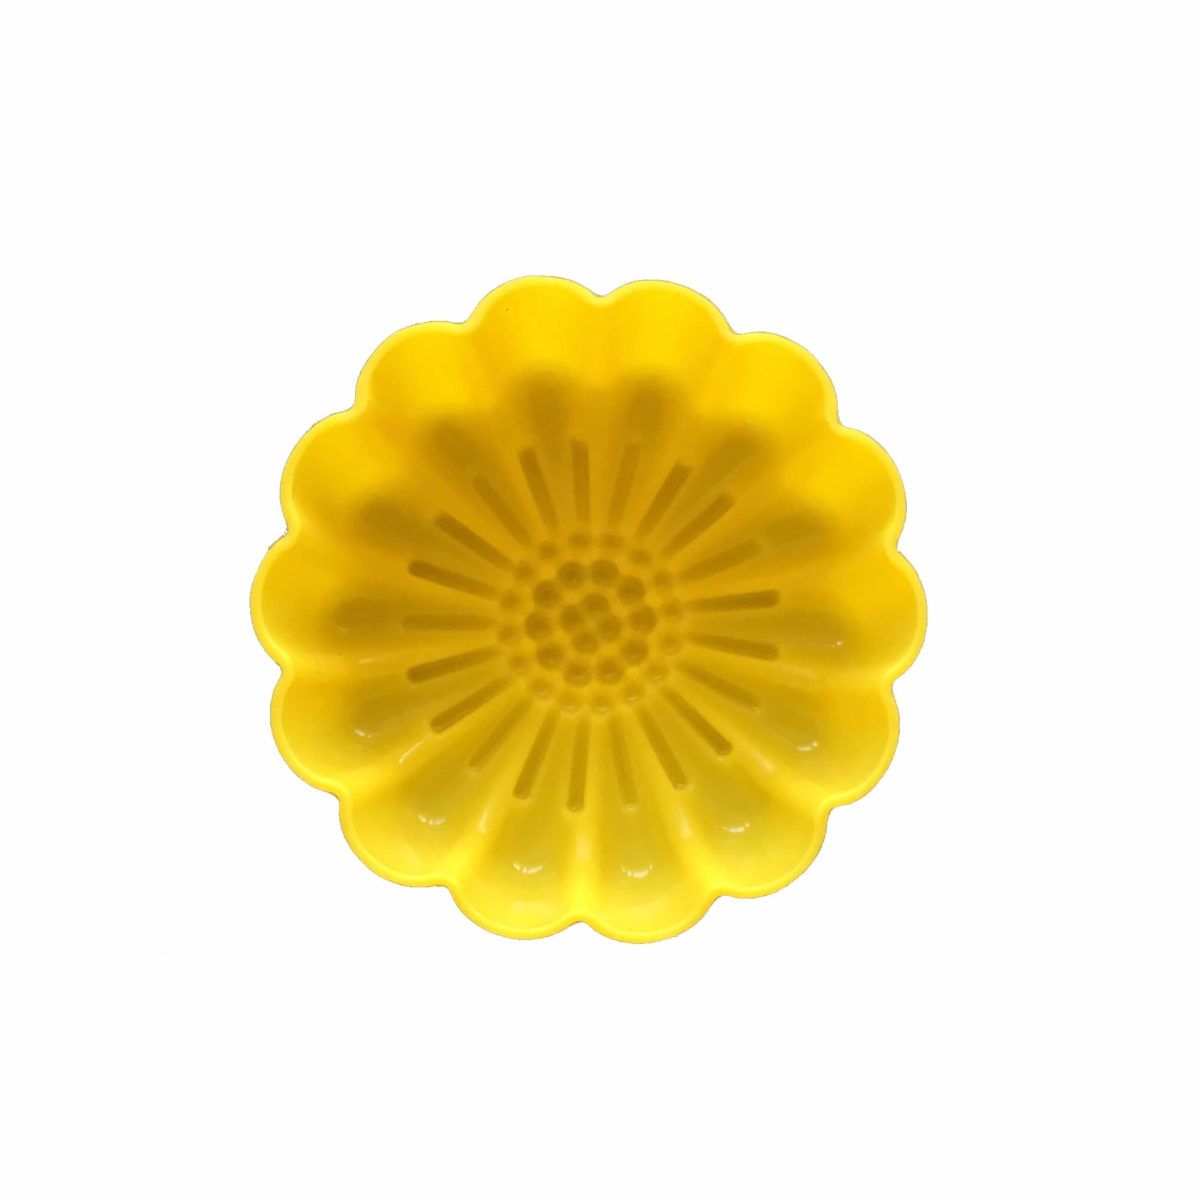 back of 5cm yellow chrysanthemum flower single cavity silicone mould